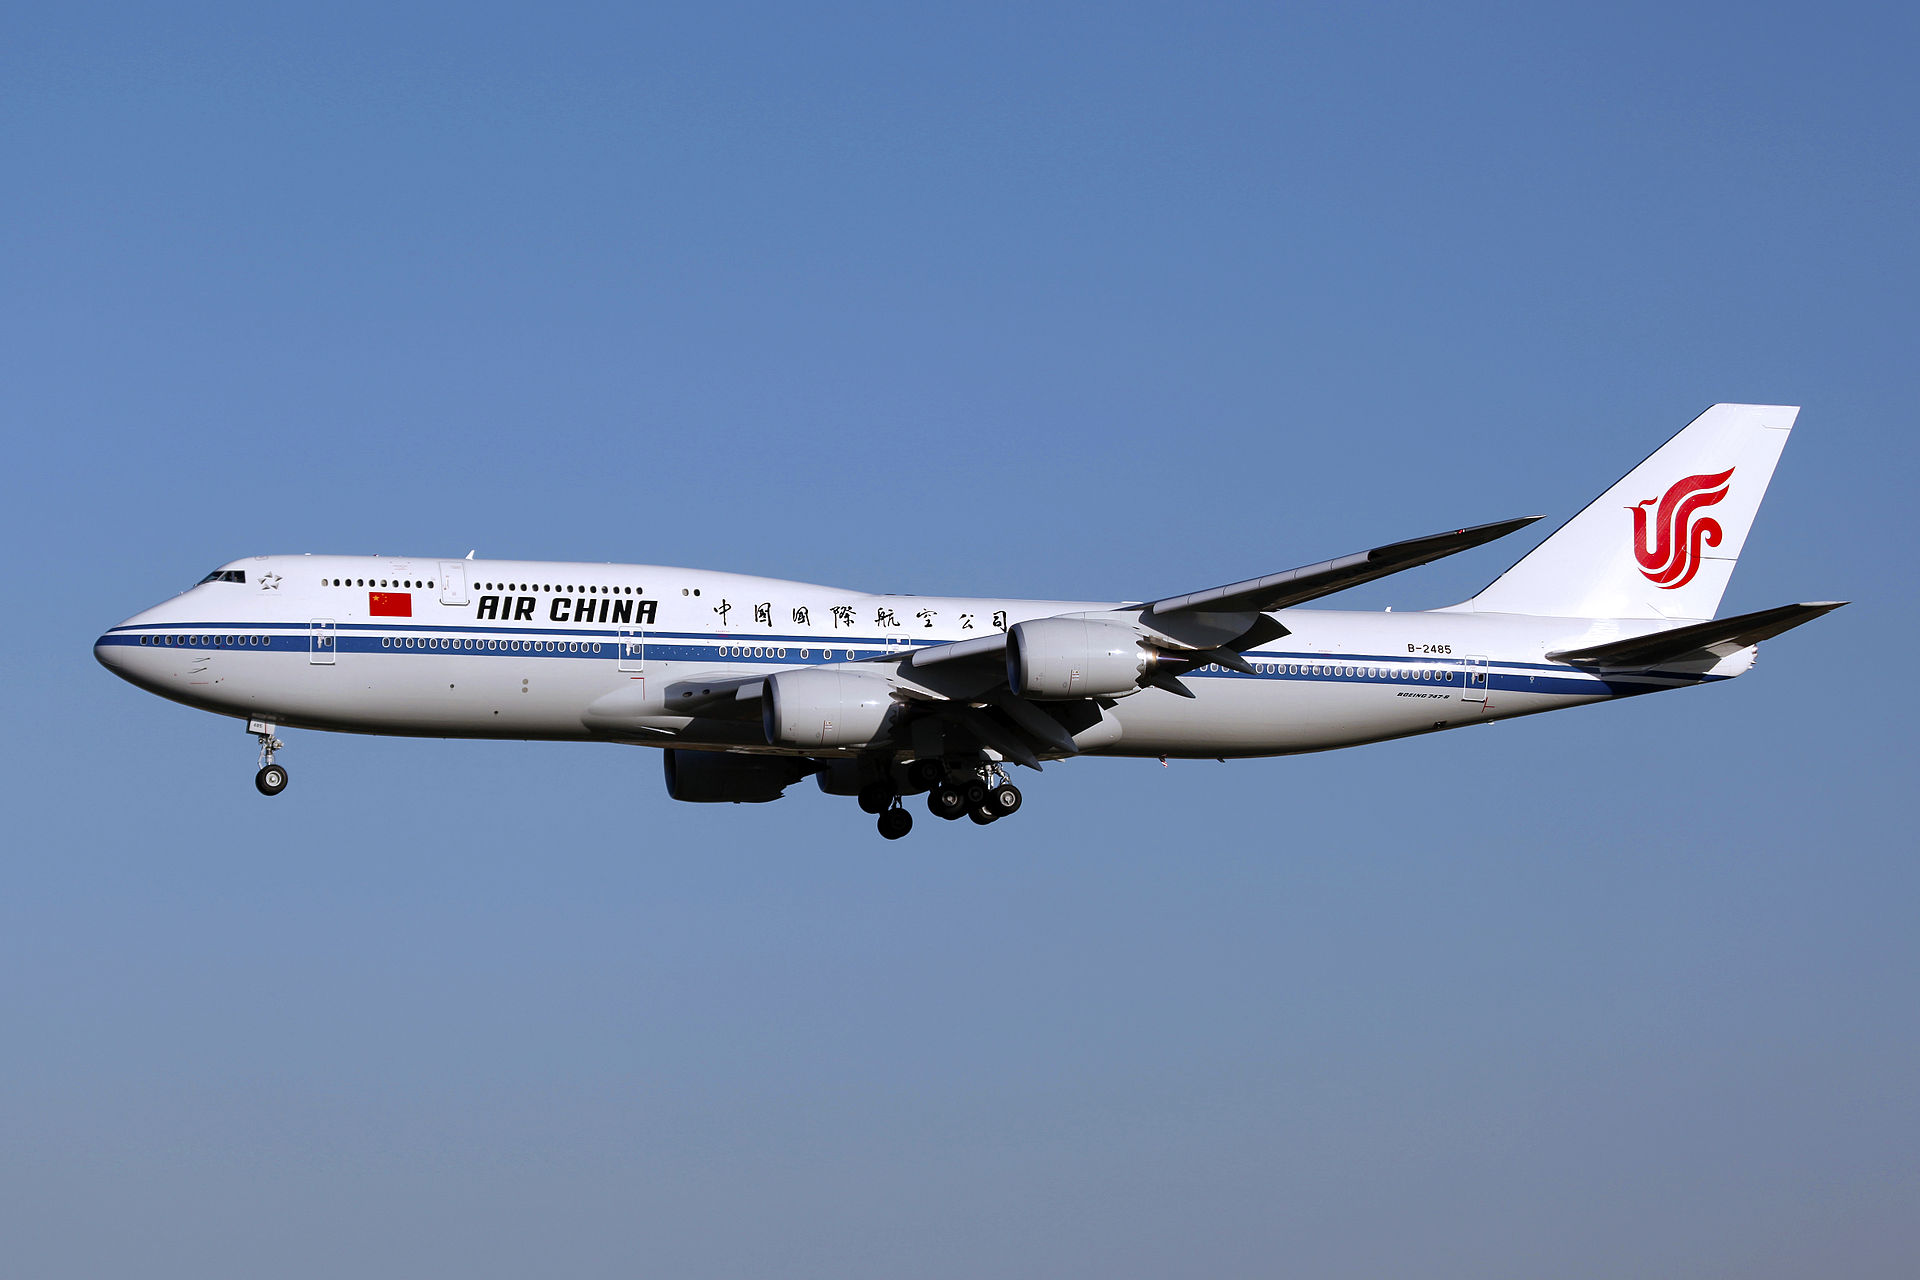 Air China Begins Service to Four Asian Destinations; What Goes In a Carry-on